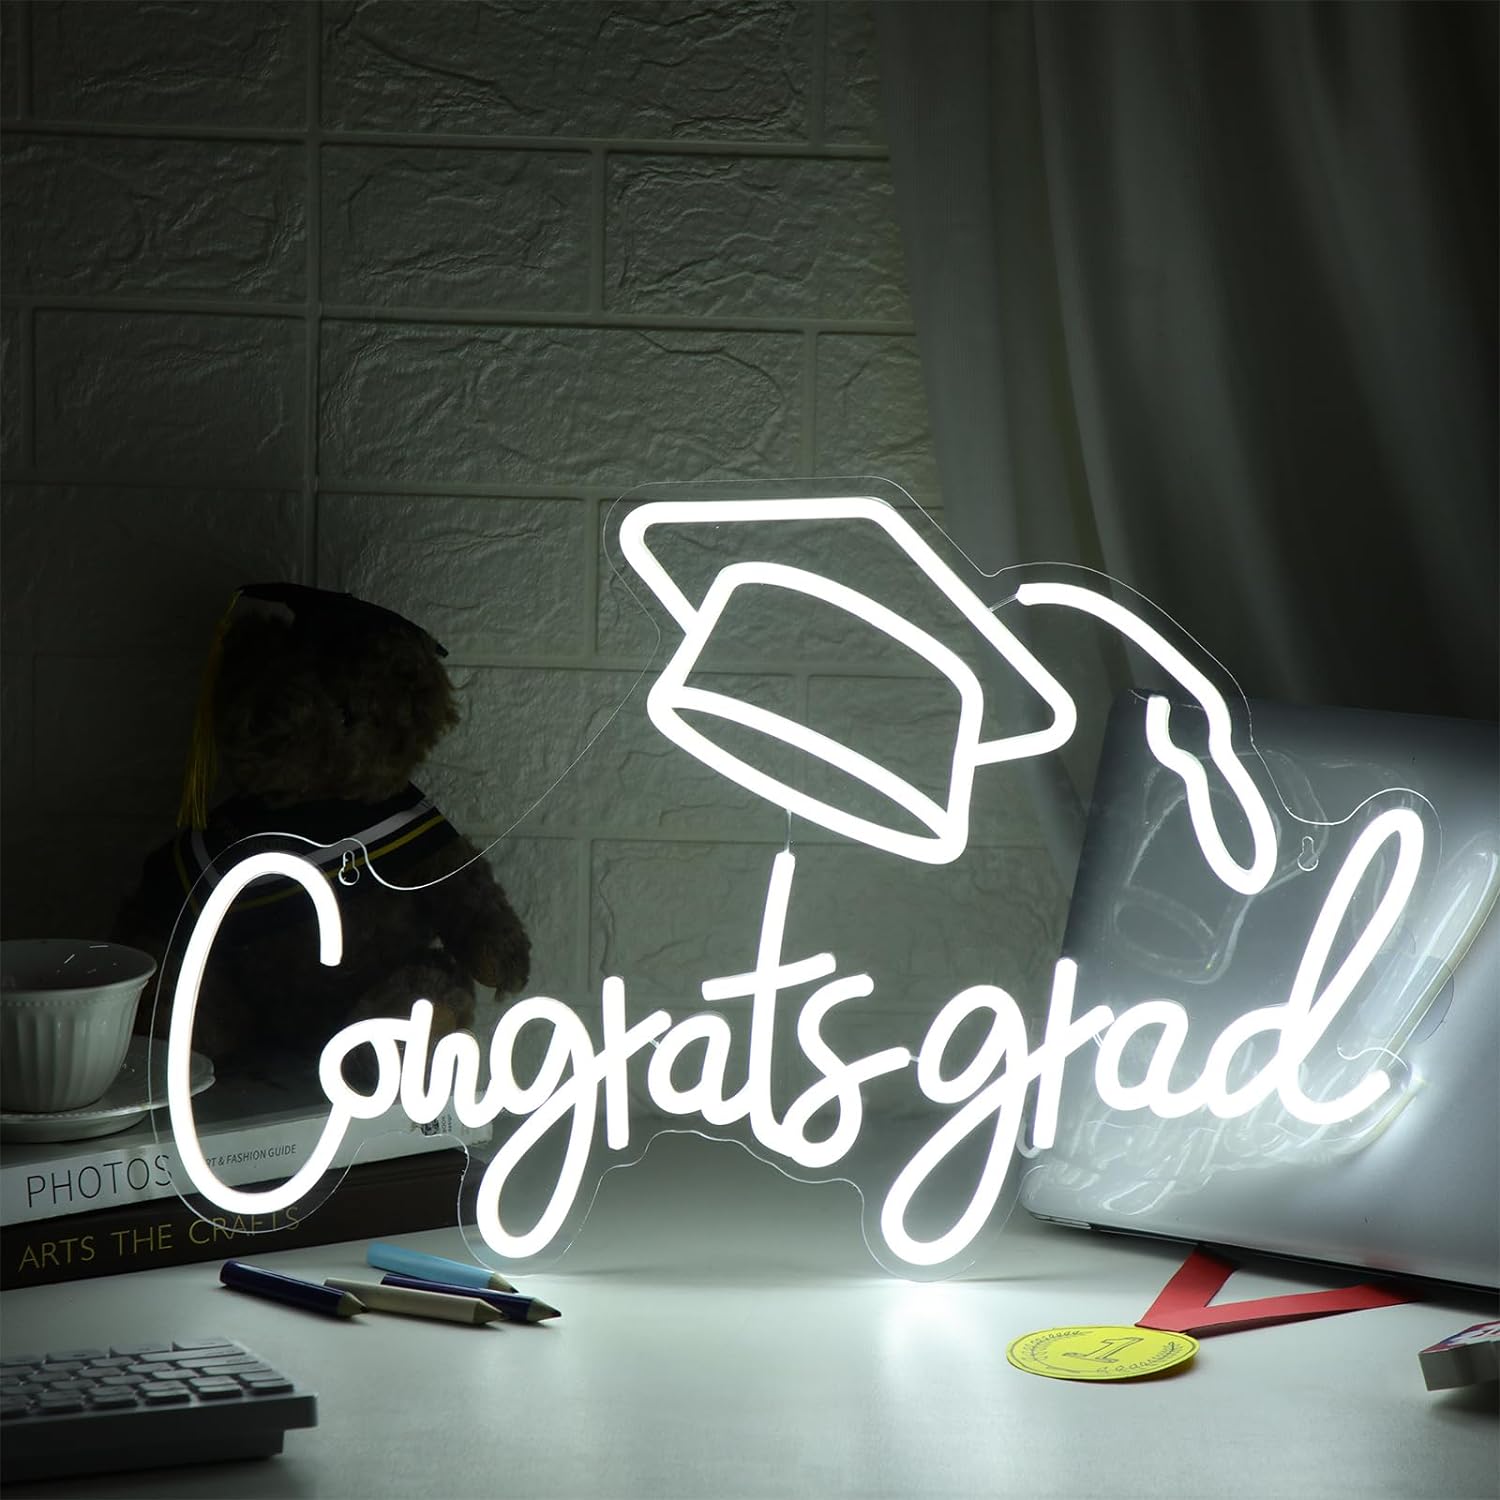 Congrats Grad Neon Sign LED Light Sign Background Wall Art Decoration for Graduation Party